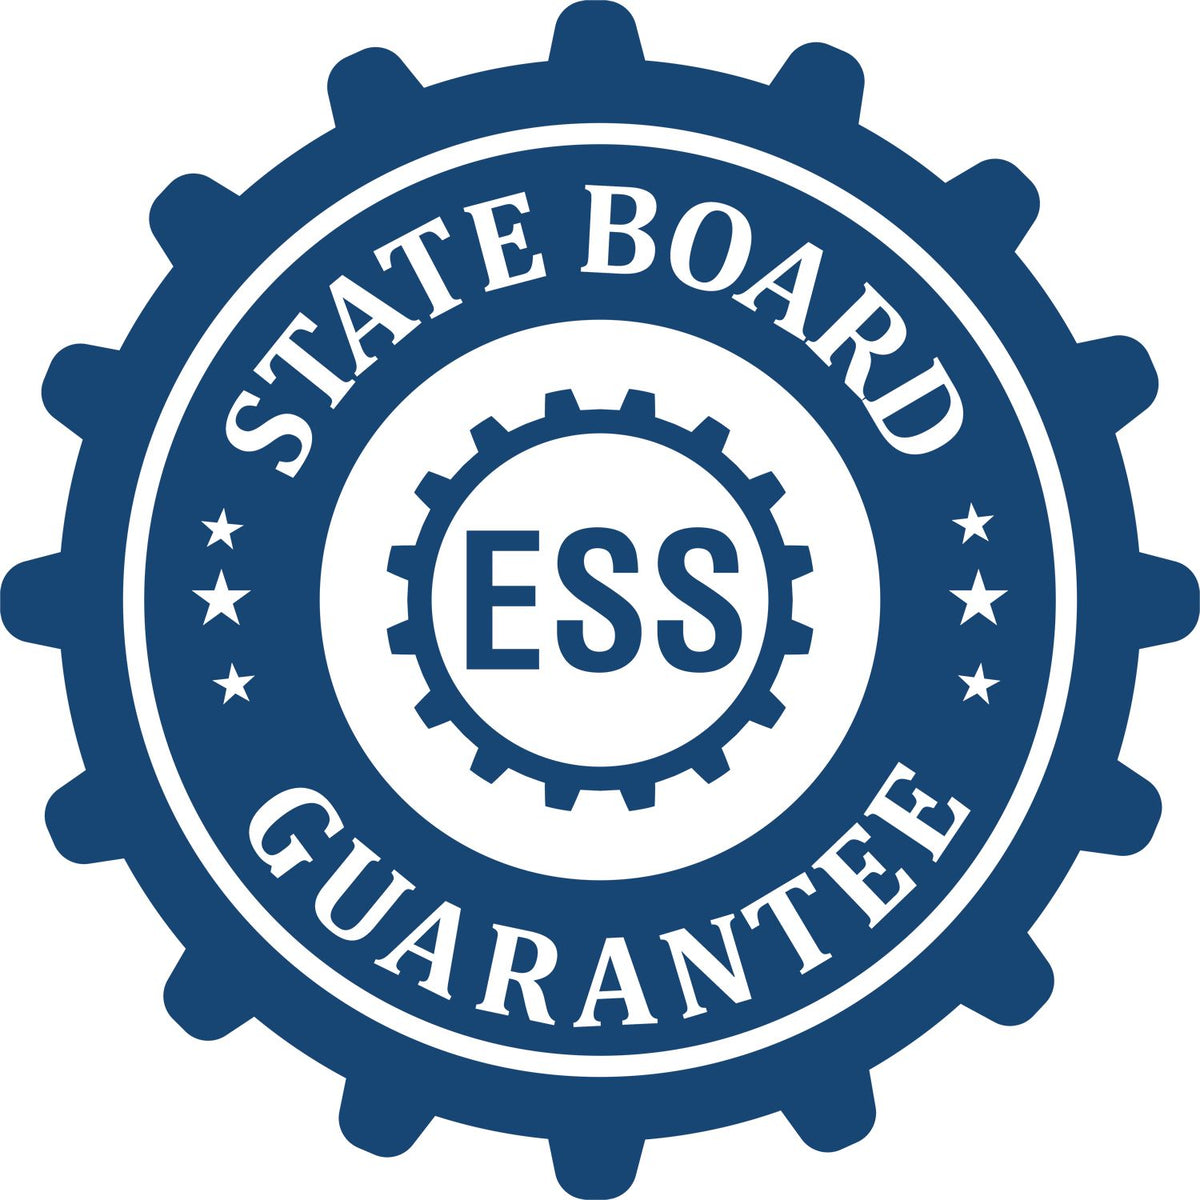 An emblem in a gear shape illustrating a state board guarantee for the Digital Rhode Island Landscape Architect Stamp product.